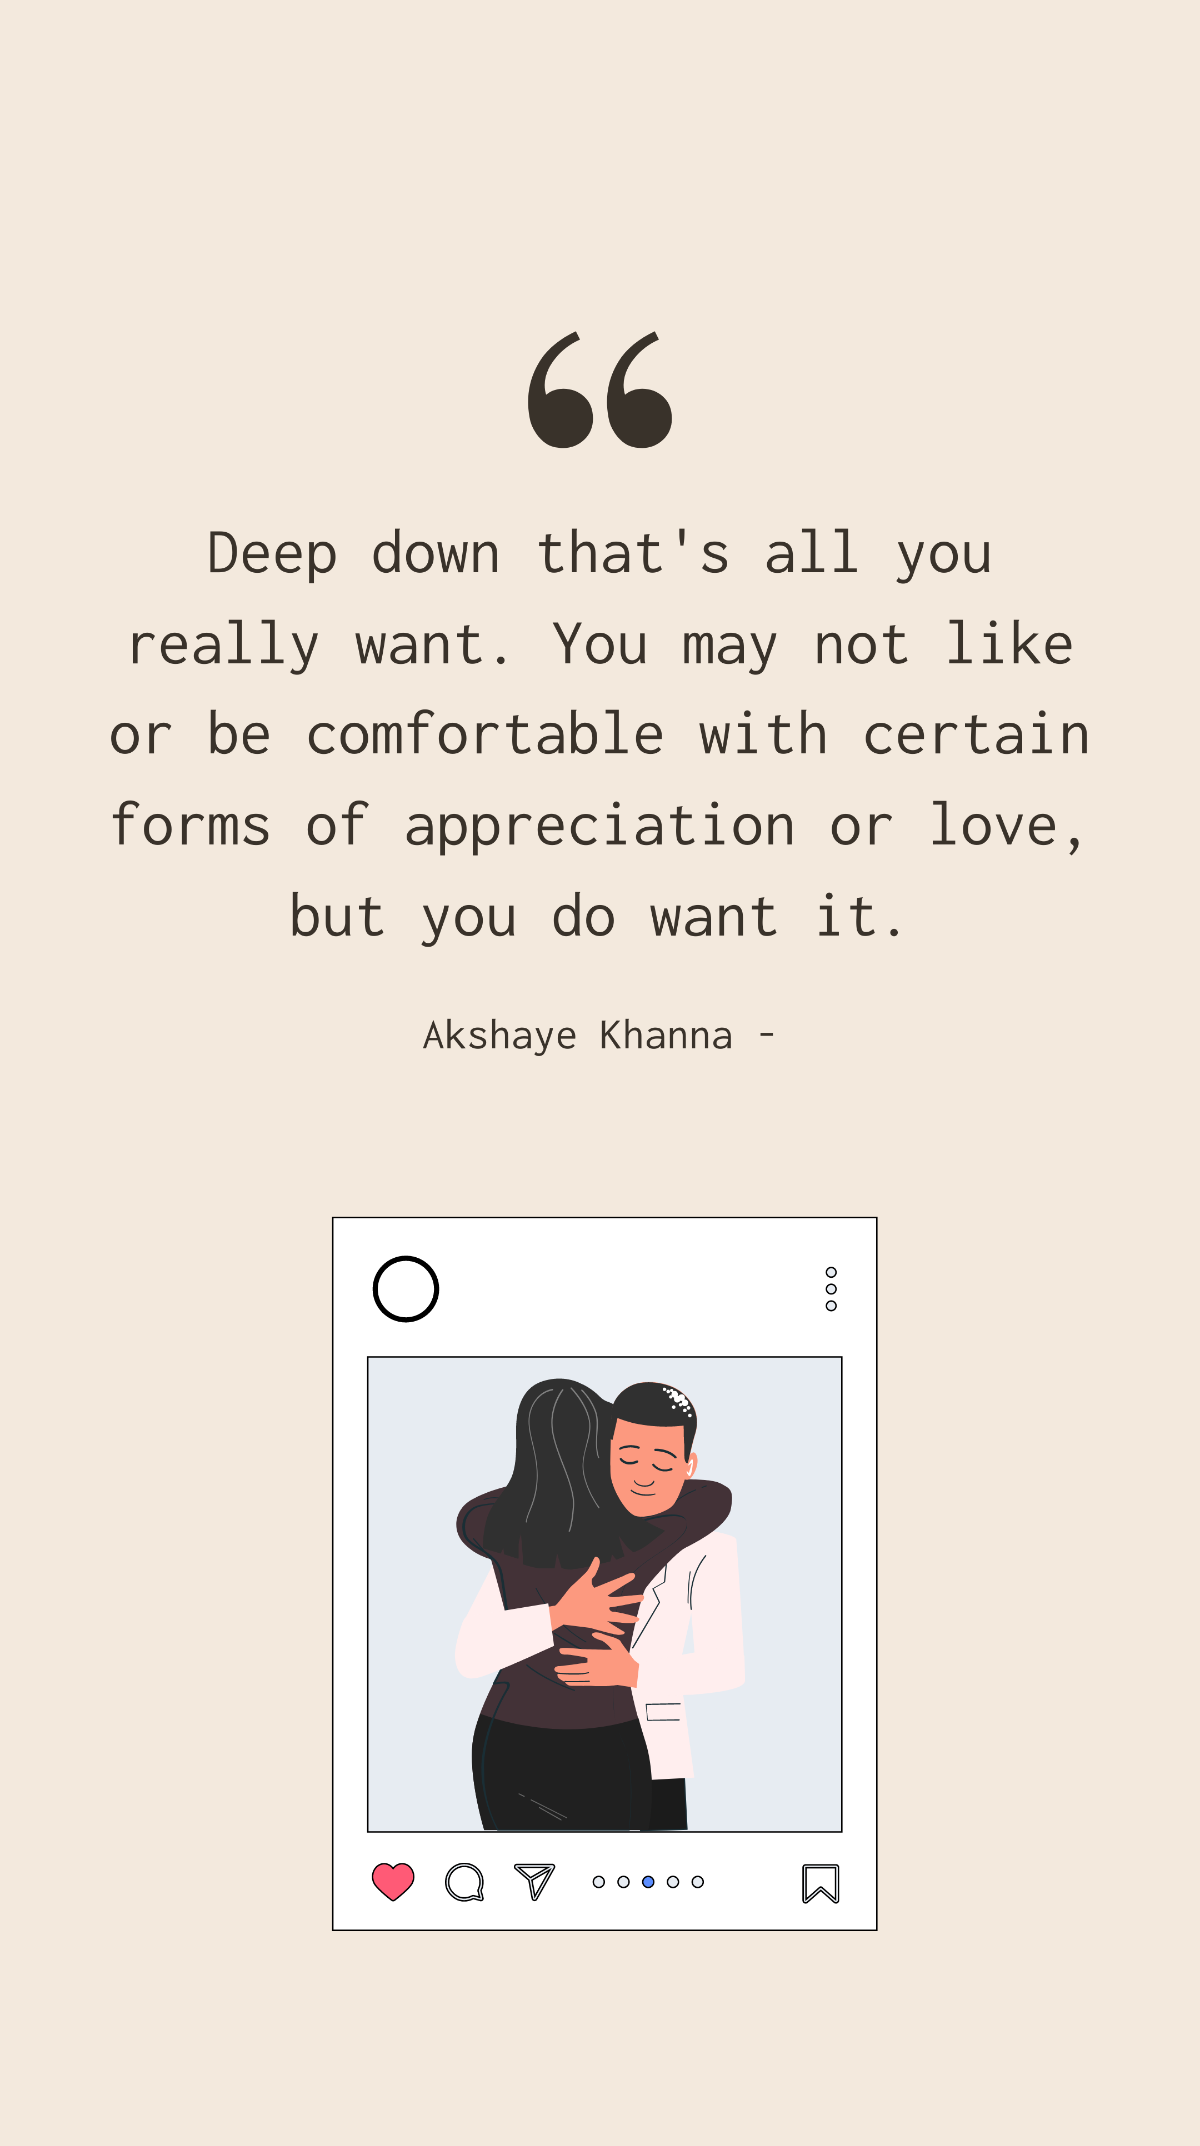 Akshaye Khanna - Deep down that's all you really want. You may not like or be comfortable with certain forms of appreciation or love, but you do want it. Template